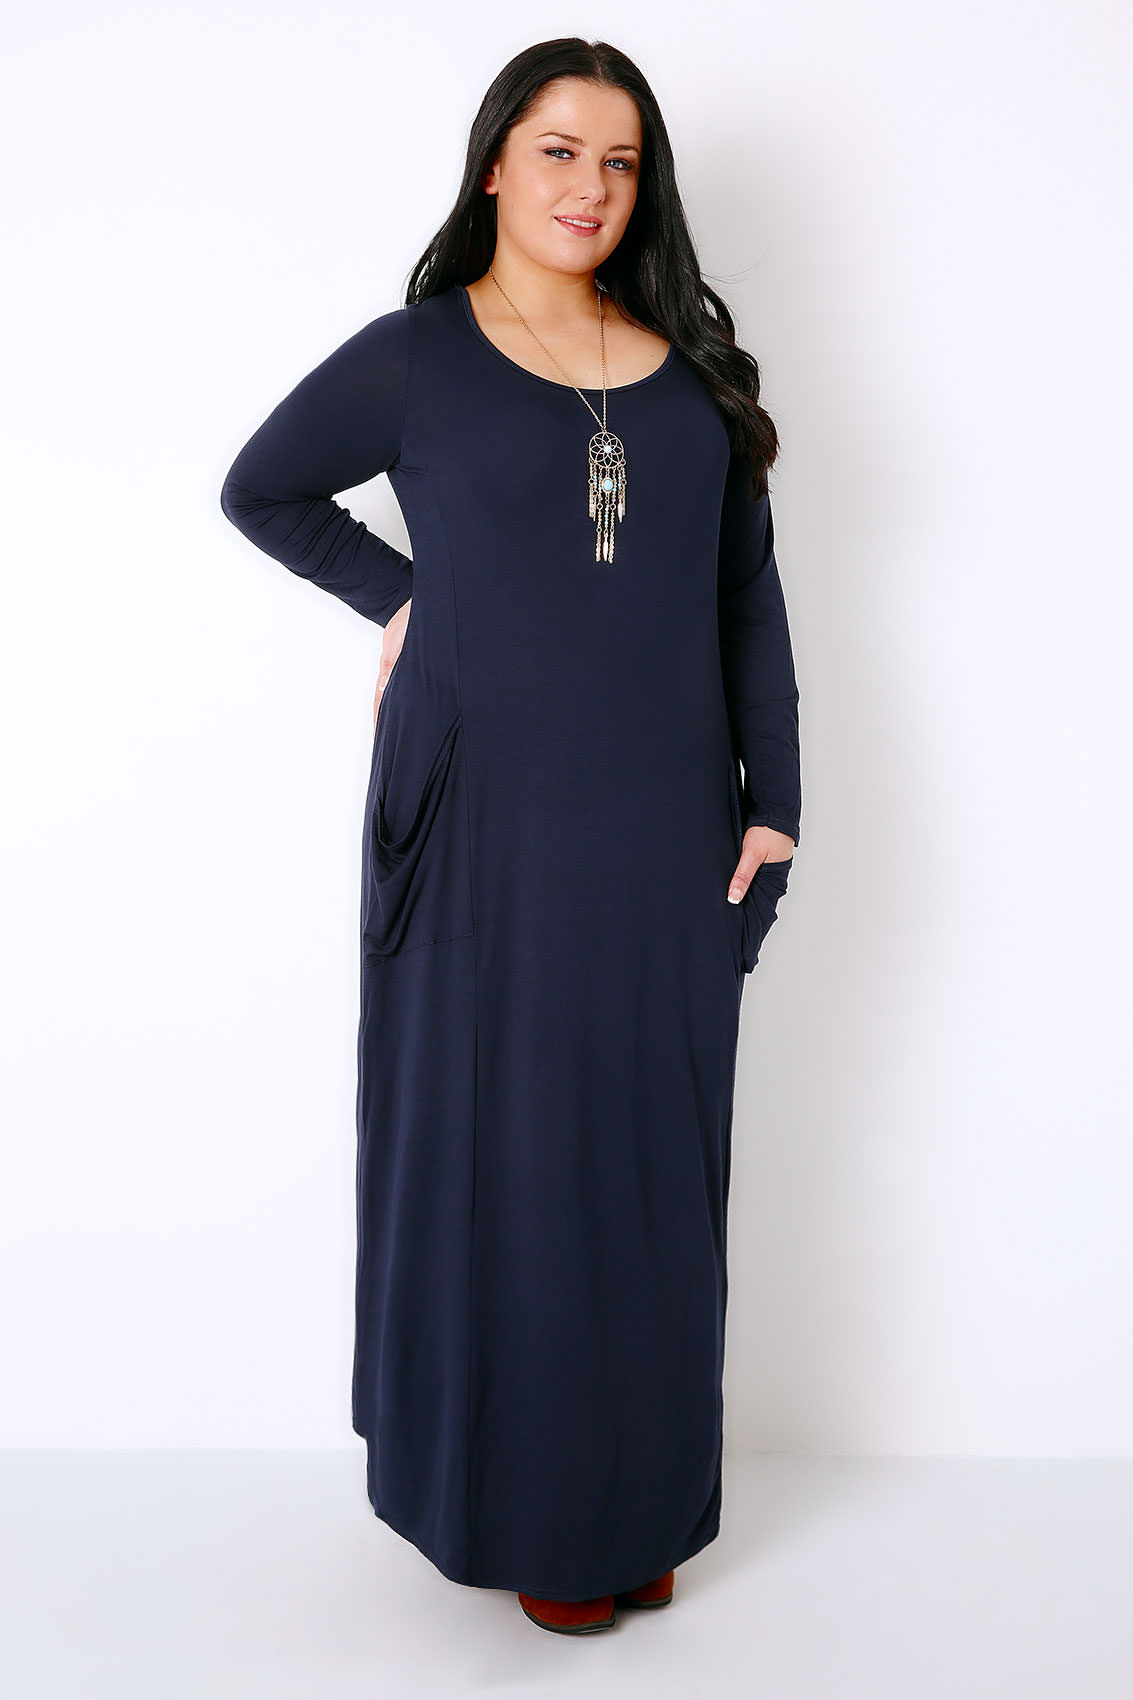 Navy Maxi Dress With Long Sleeves & Drop Pockets, Plus size 16 to 32